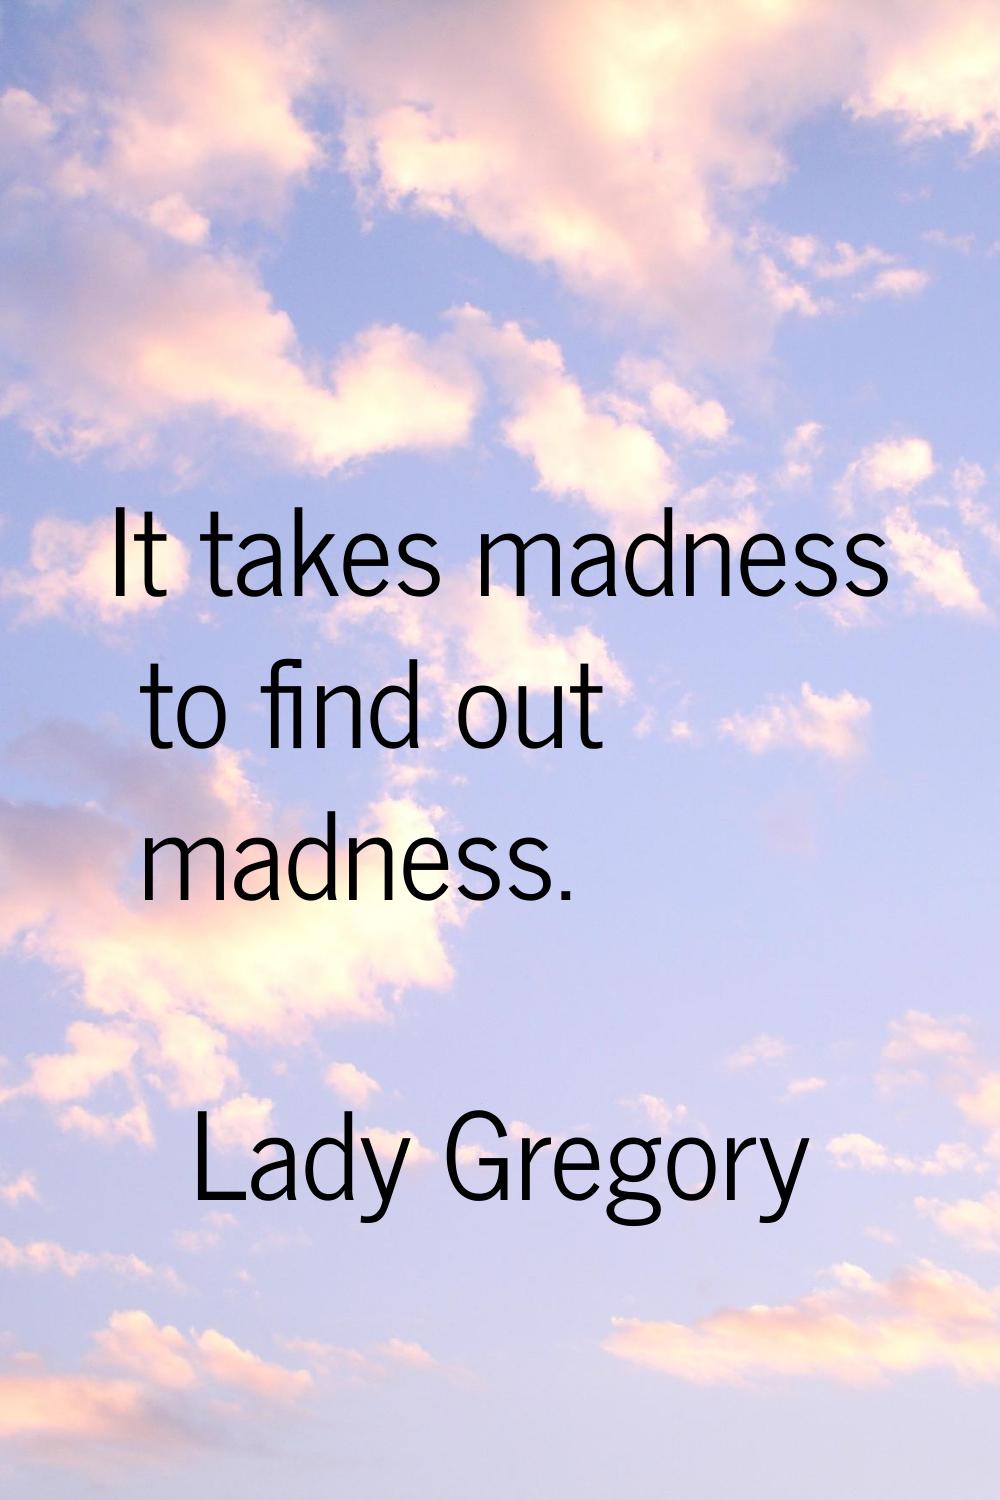 It takes madness to find out madness.